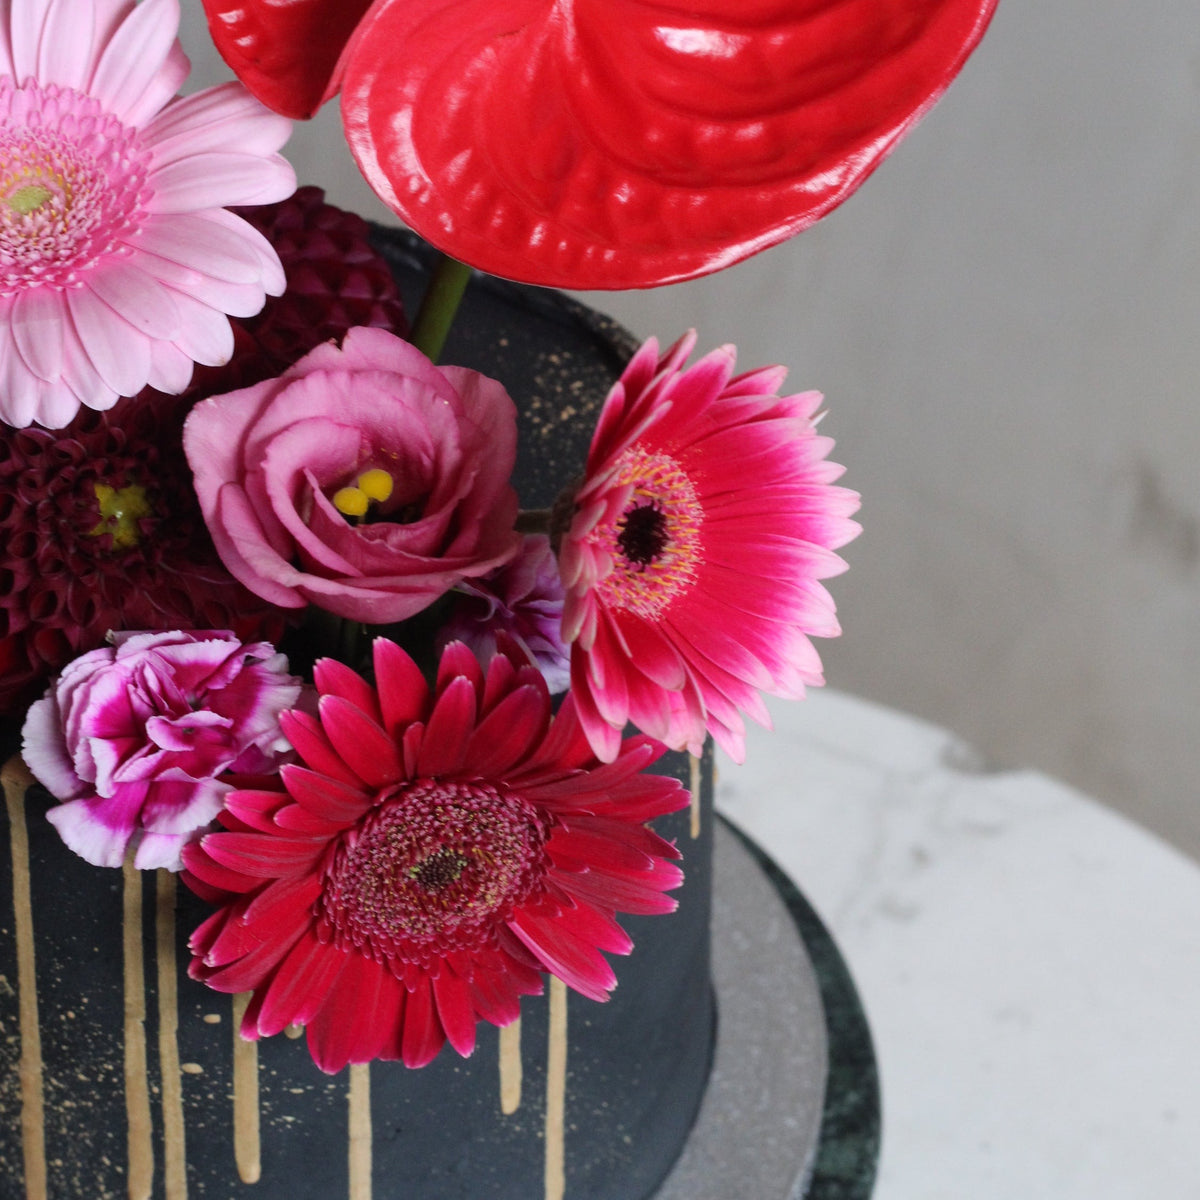 Blossom Hat Cake with black icing, metallic splashes &amp; a funky bold headpiece of fresh flowers.